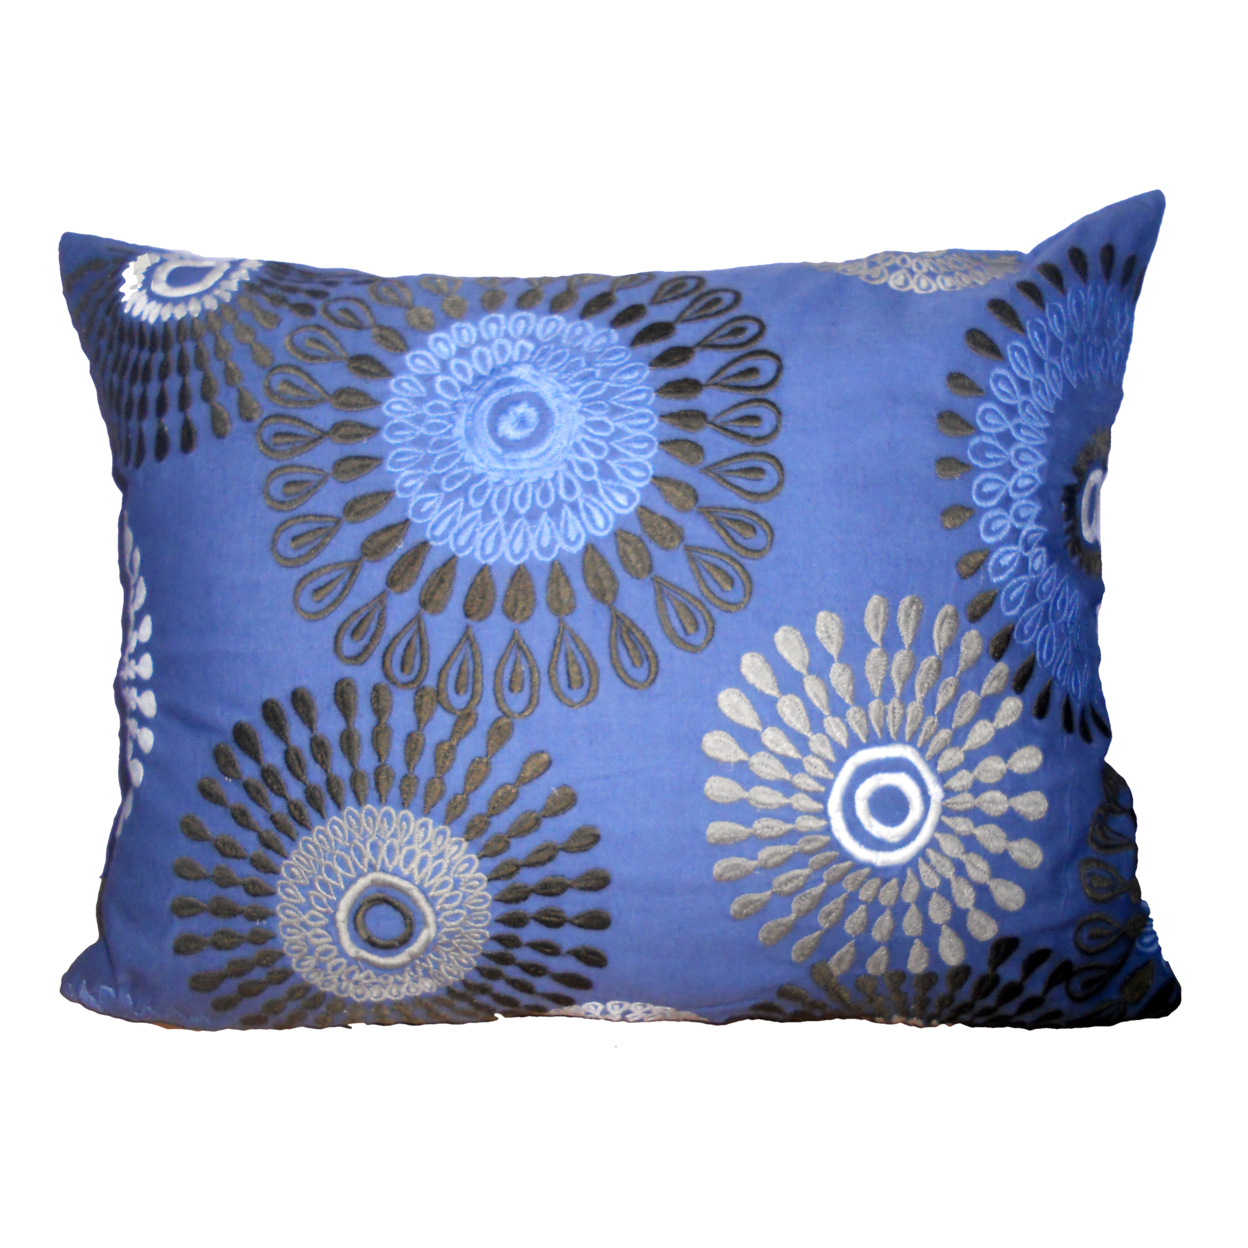 20 X 16 Inch Cotton Pillow With Floral Embroidery, Set Of 2, Blue And Black- Saltoro Sherpi